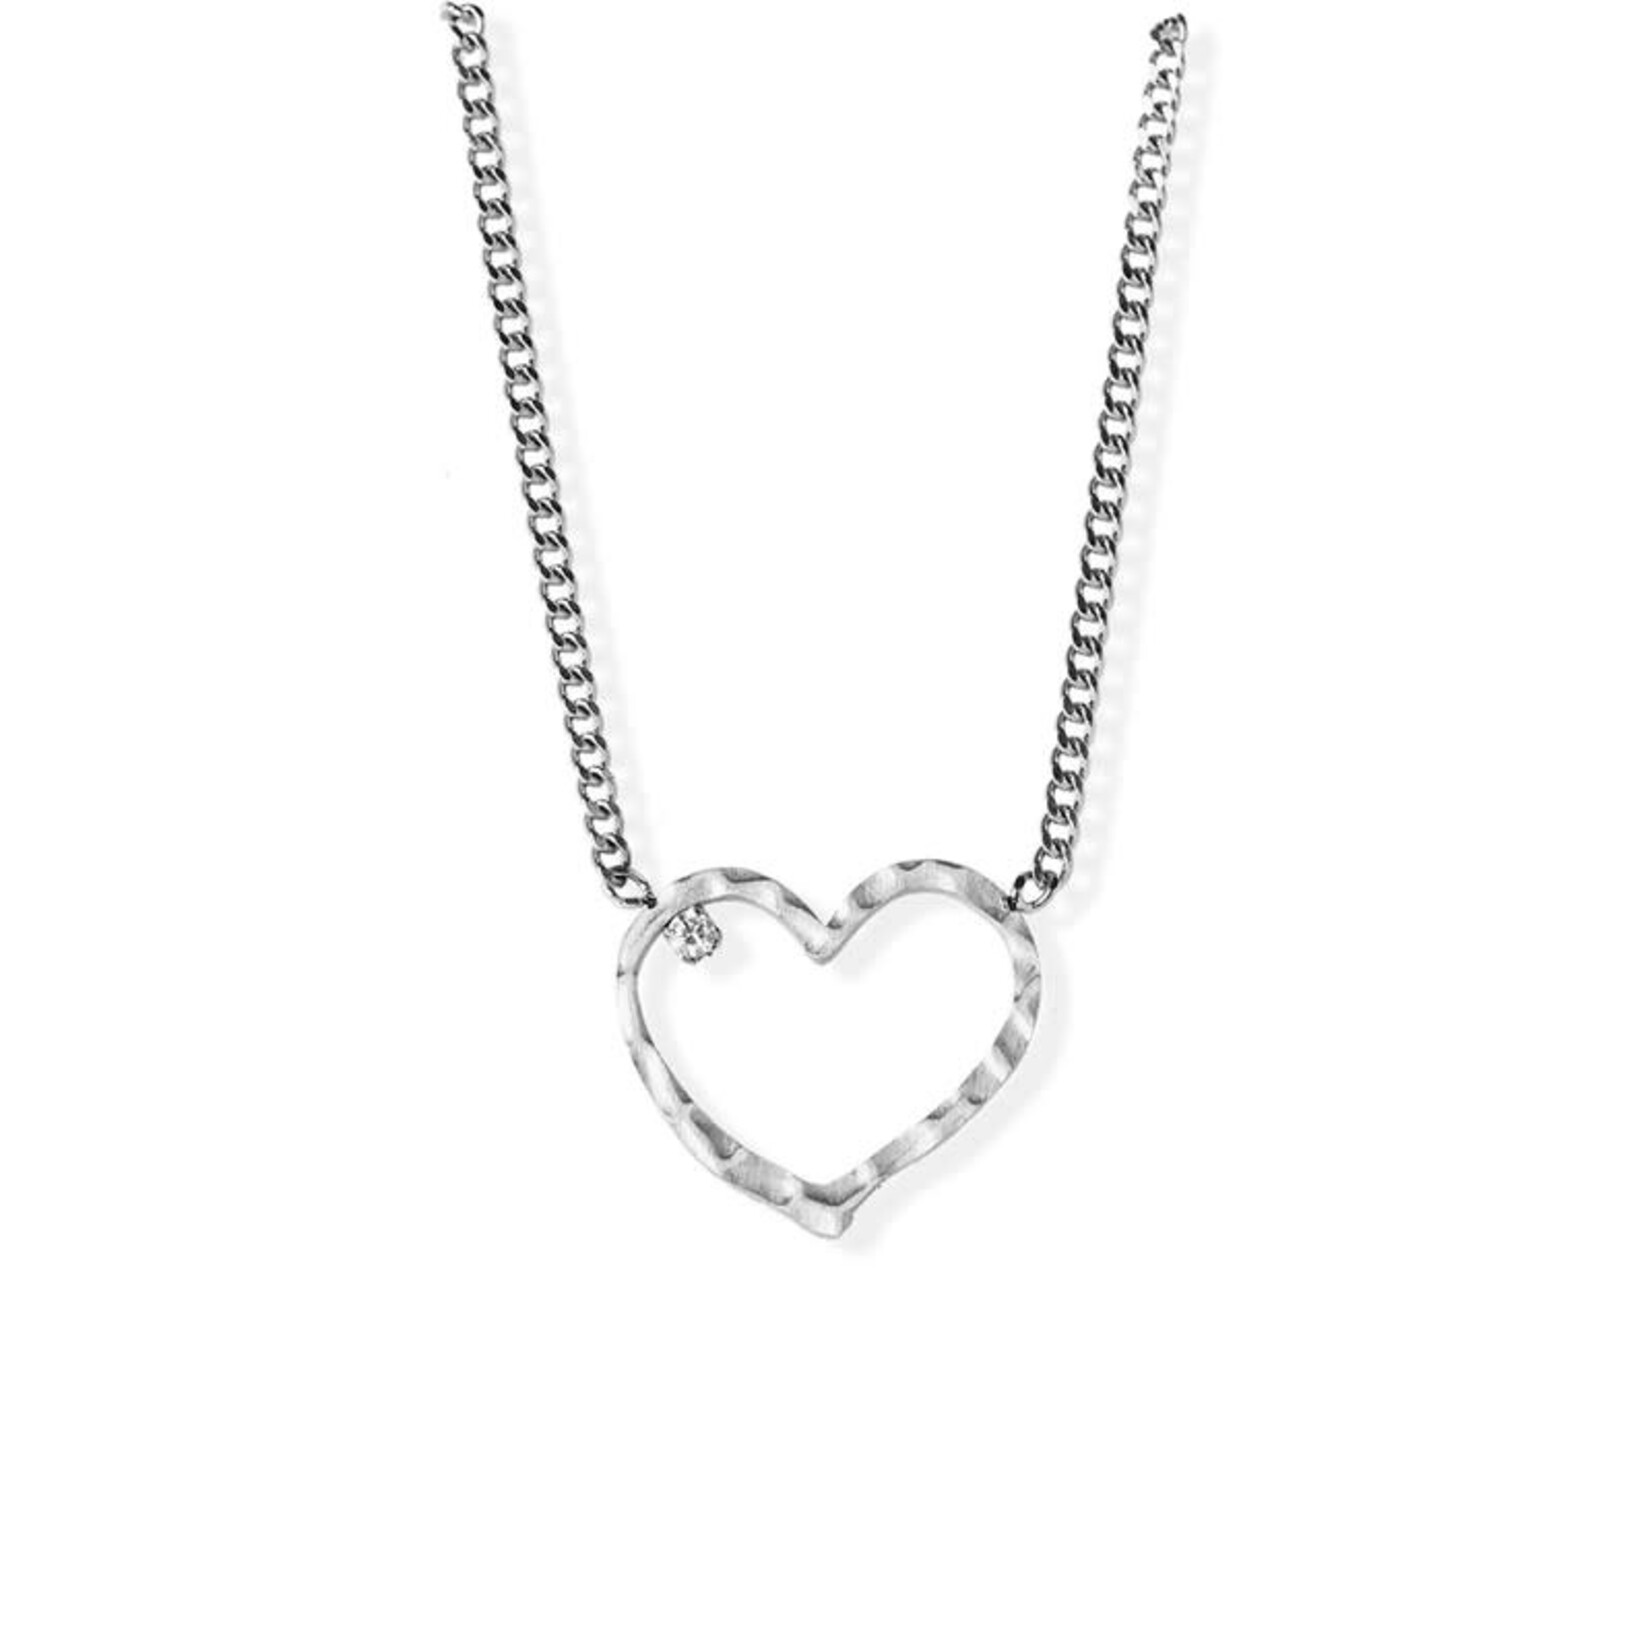 FAB Accessories Hammered Heart Necklace -